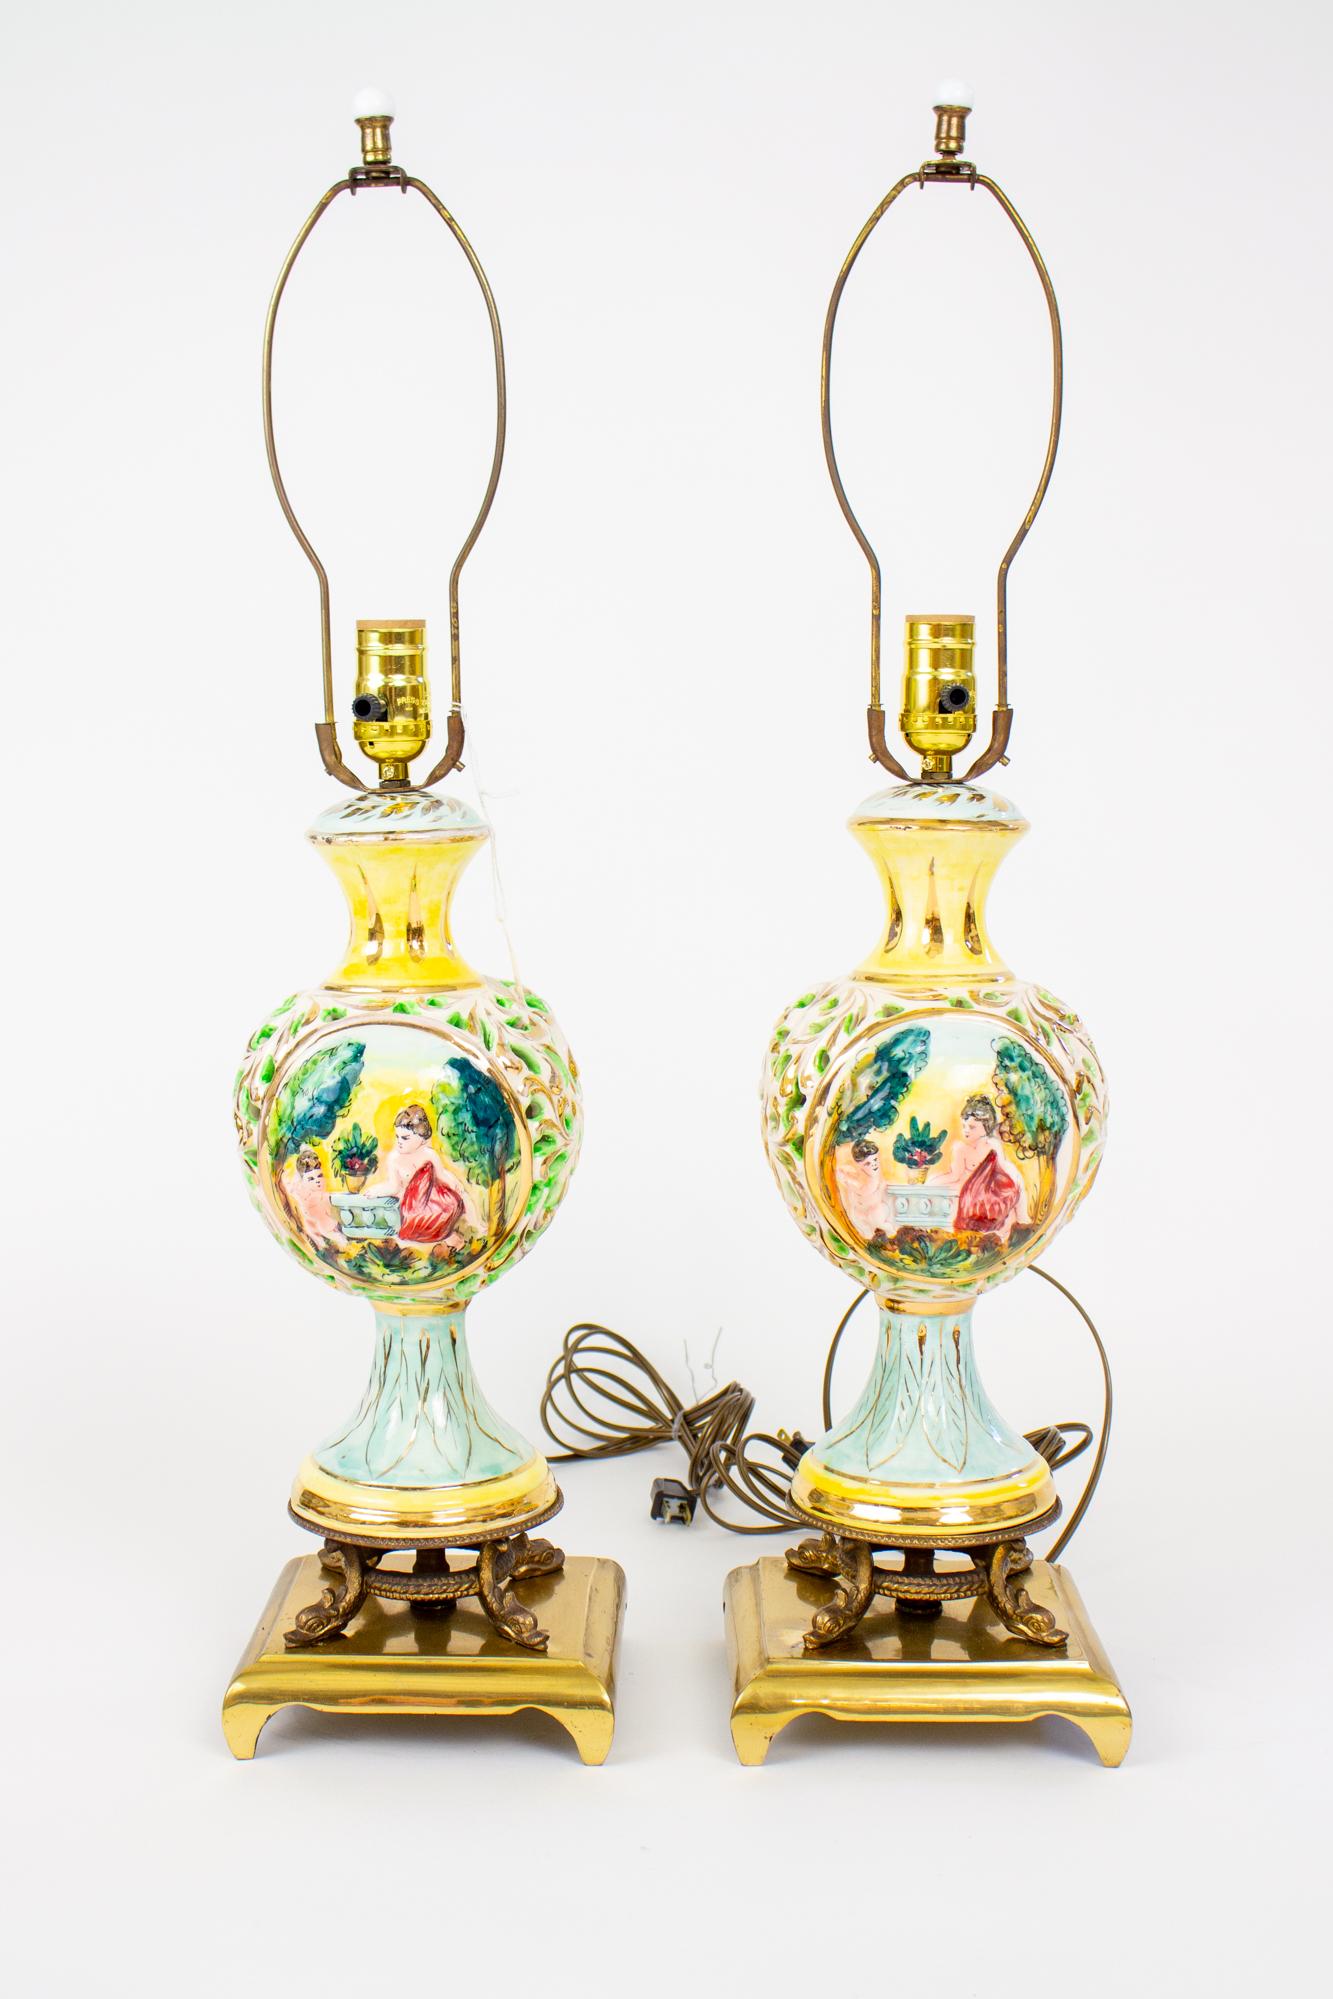 Italian Mid 20th Century Capodimonte Yellow And Sky Blue Table Lamps - a Pair For Sale